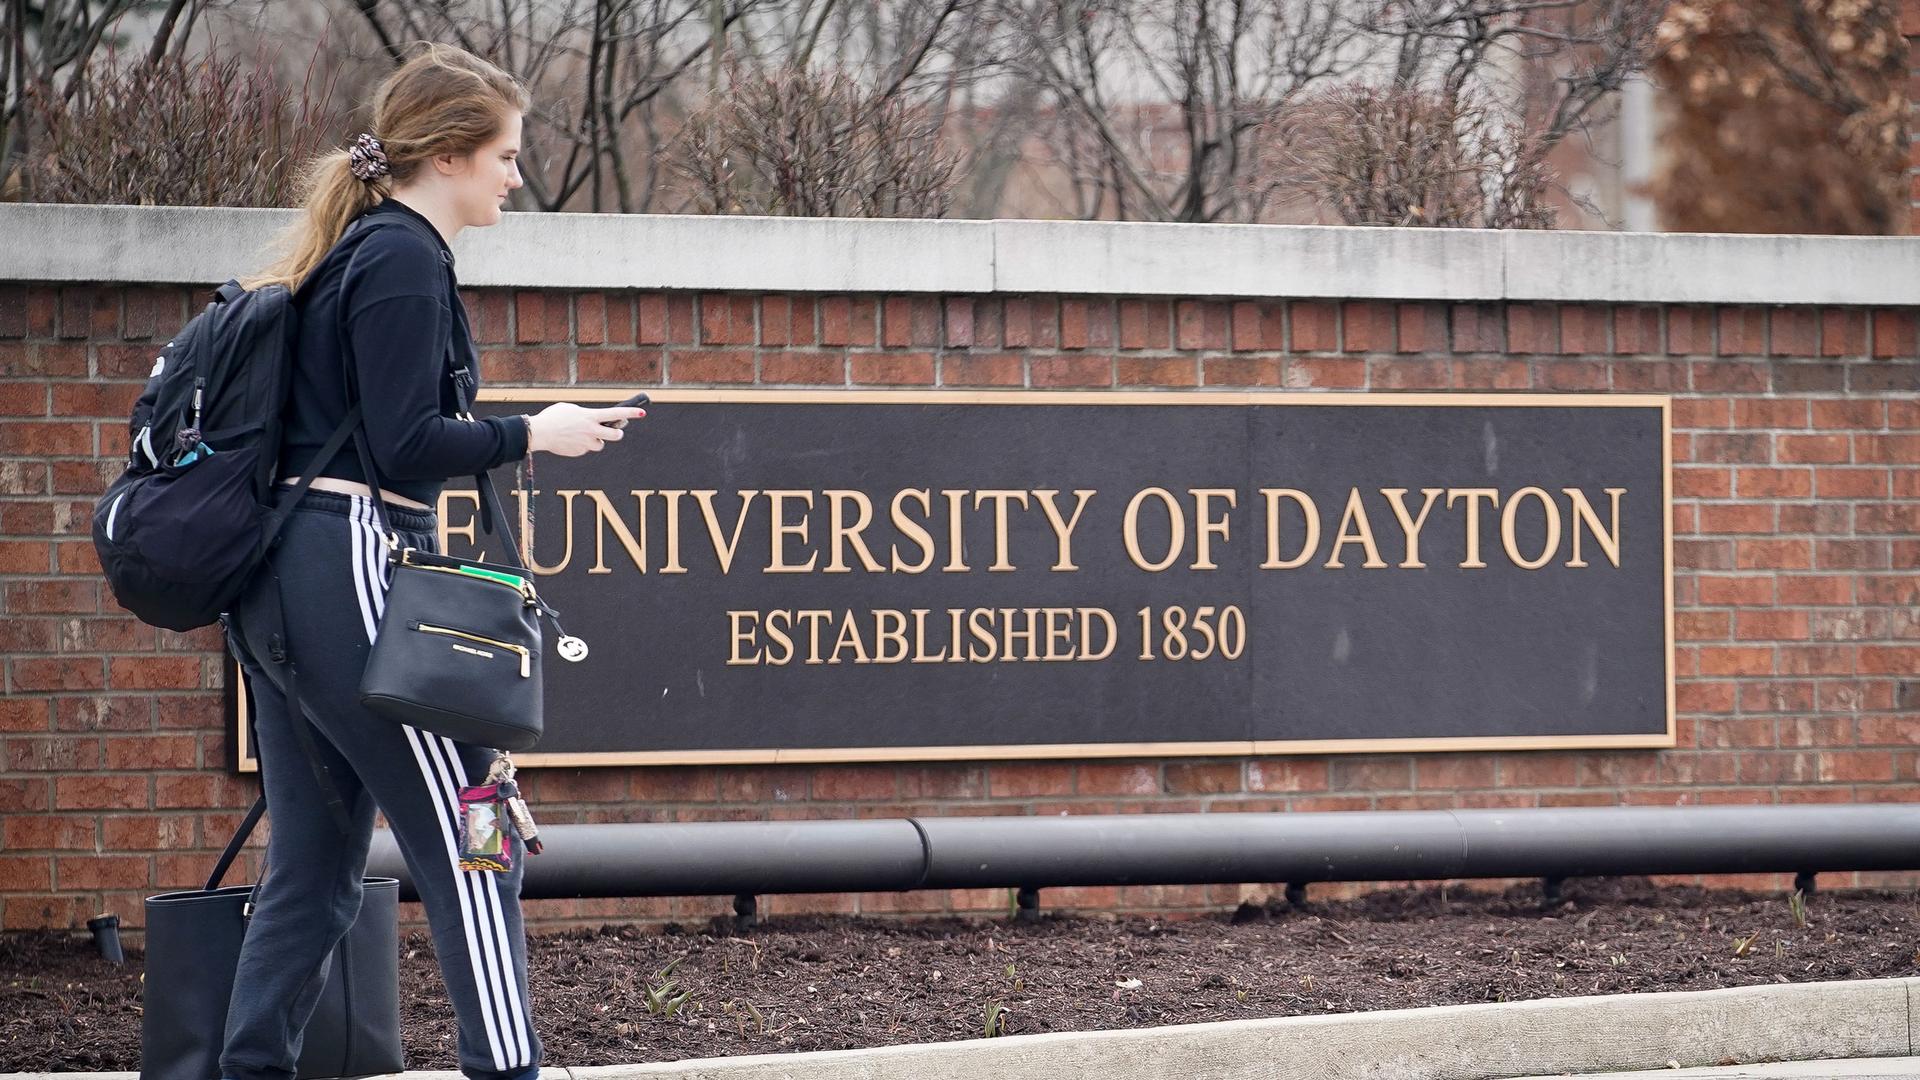 A student carries her bags in front of a sign for the University of Dayton